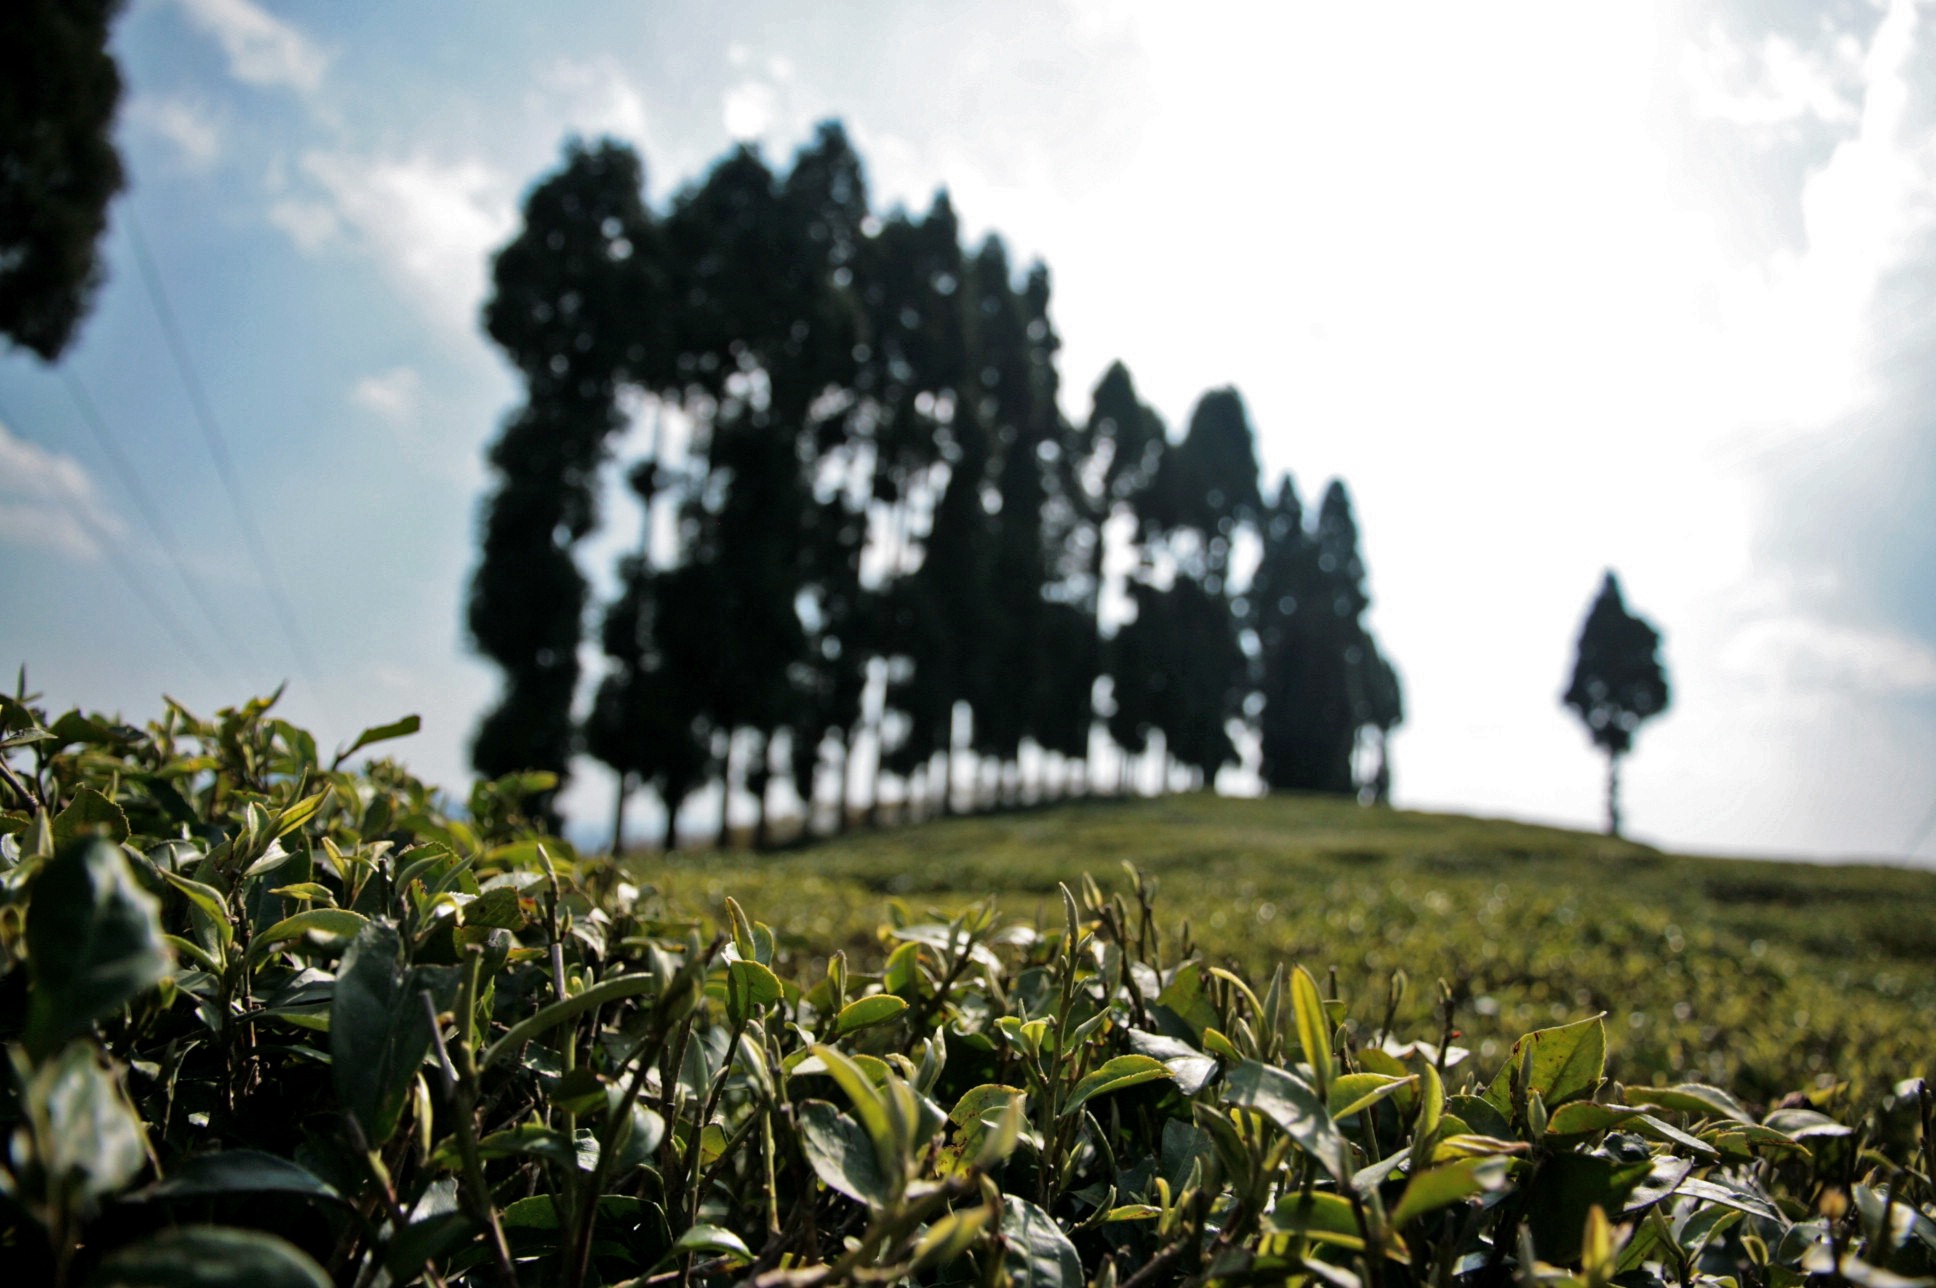 Taken from the tea gardens in Darjeeling, where we sat and drank black tea with milk and an (un)healthy dose of sugar, and healthy green tea, brewing in pots in small tin huts by the roadside. Tea production puts Darjeeling on the map of tourism, and made the long hairpin-bend drives bearable.